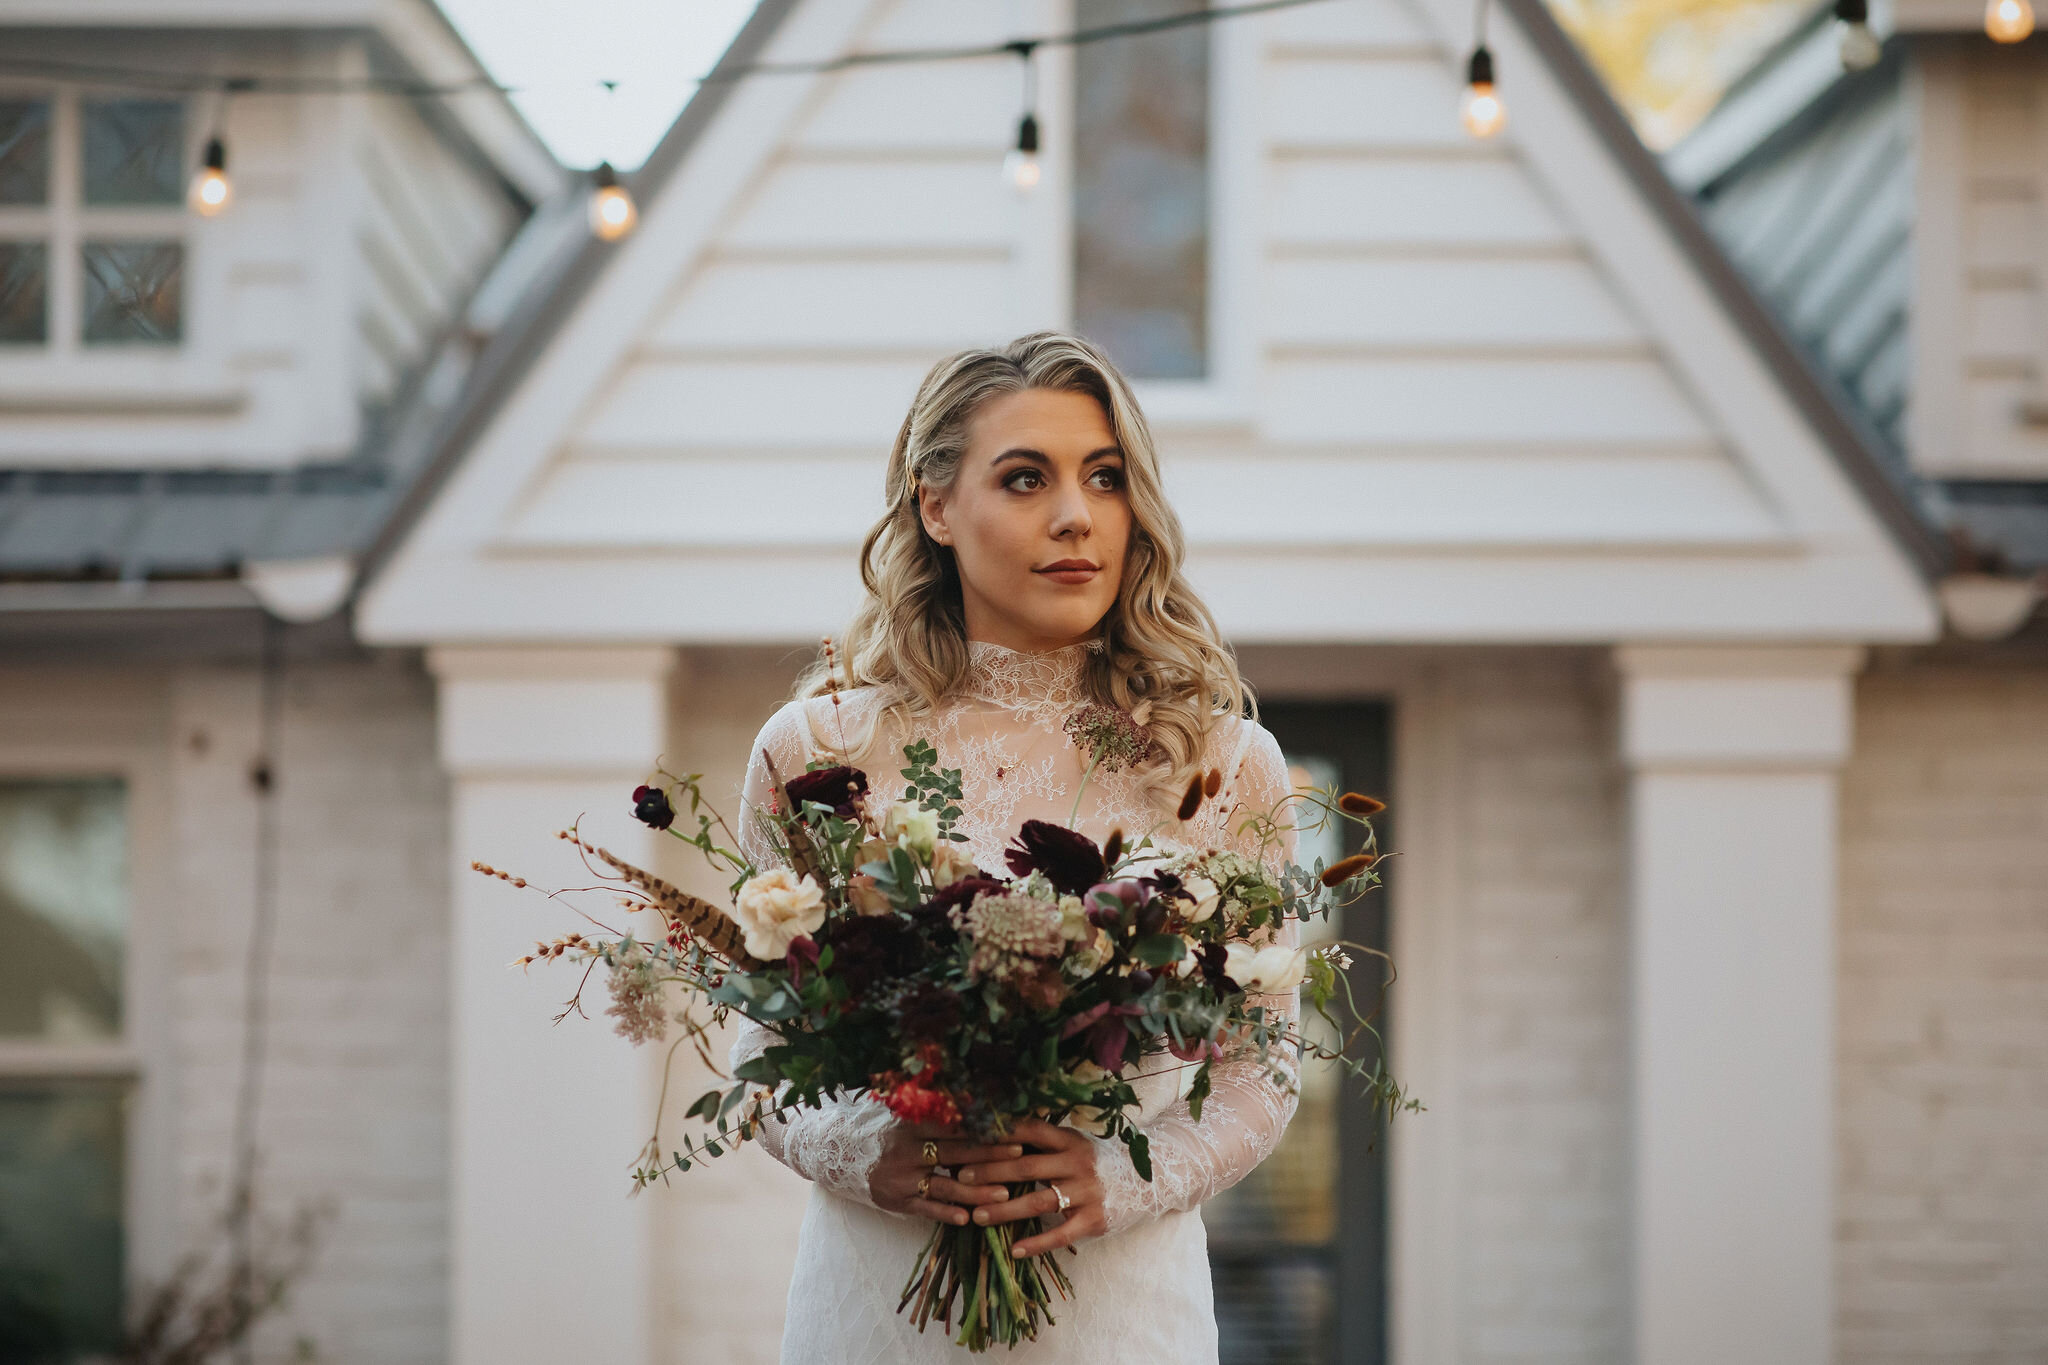 A perfect botanical and moody Bridal bouquet filled with Chocolate Cosmos, Queen Ann's Lace, Baby Eucalyptus, Rust Bunny Tails, Festival Bush, Antique Carnations, Burgundy Ranunculus, and Brown Lisianthus. Designed by Nashville wedding floral design…